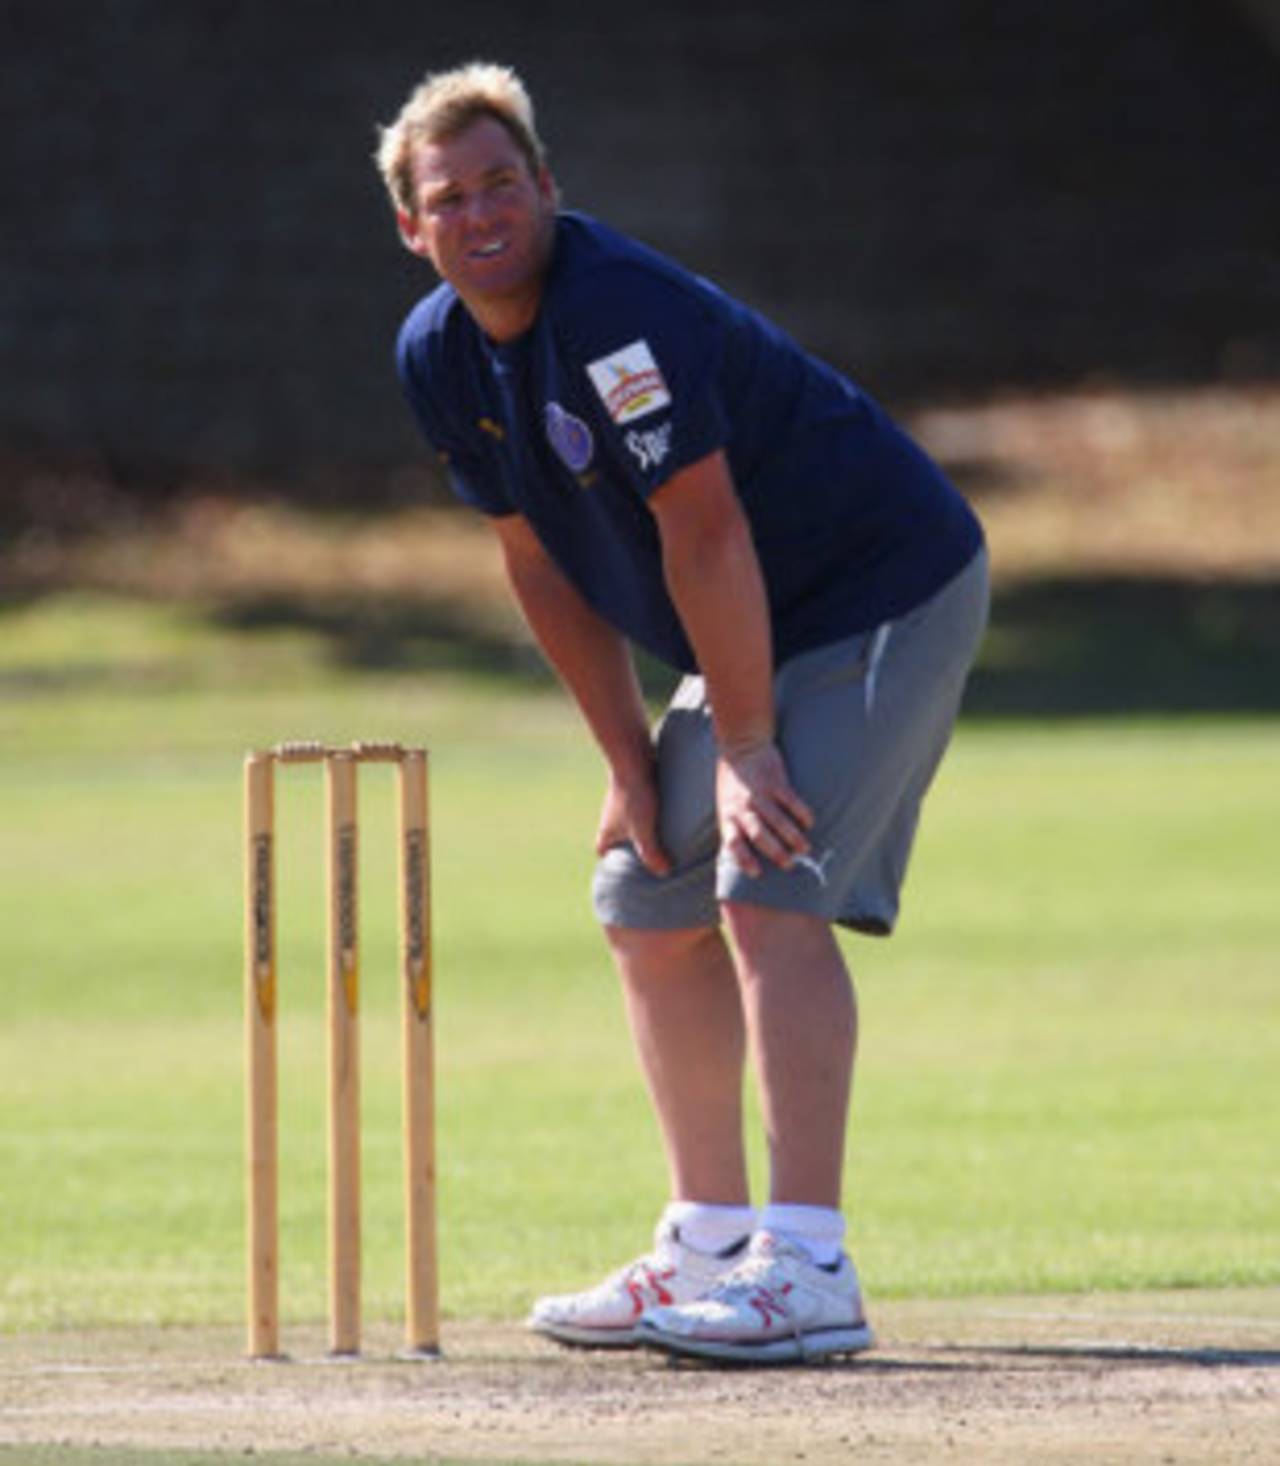 Shane Warne at a Rajasthan Royals practice session, Cape Town, April 15, 2009